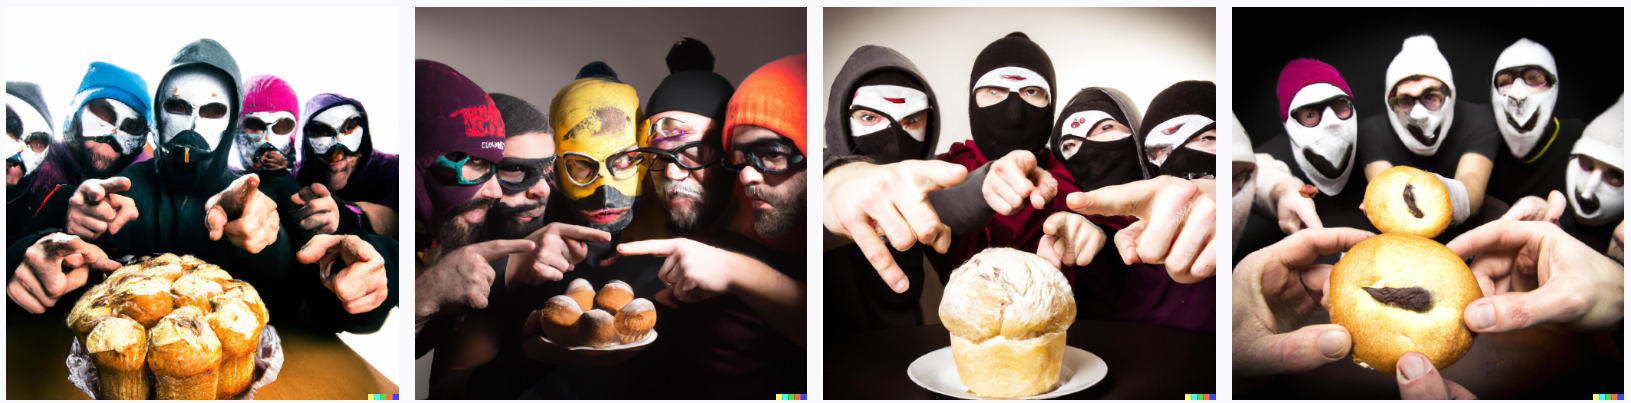 group of men in ski mask in a circle pointing at a muffin etching scary